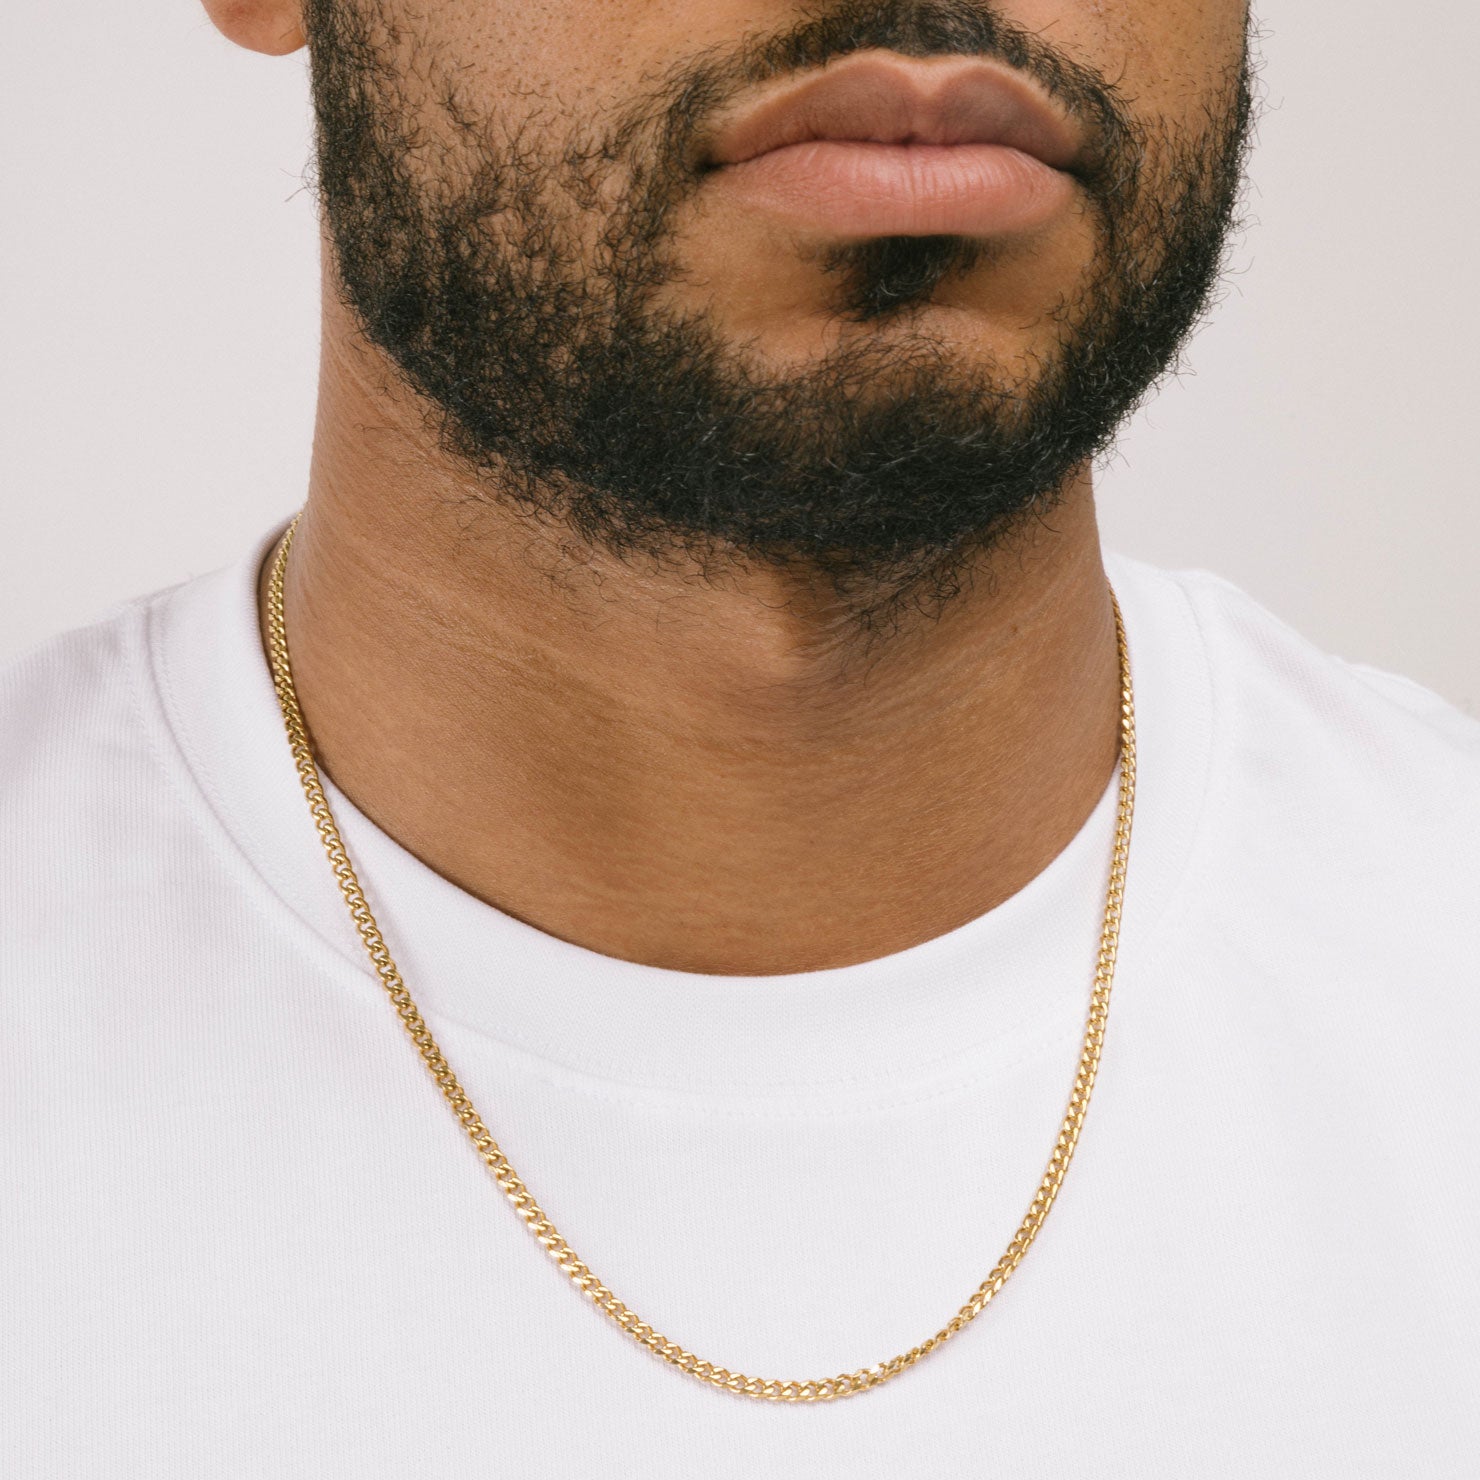 A model wearing the Cuban Chain in Gold is crafted from 18K Gold Plated material and is non-tarnish, water-resistant, and designed to be hypoallergenic.